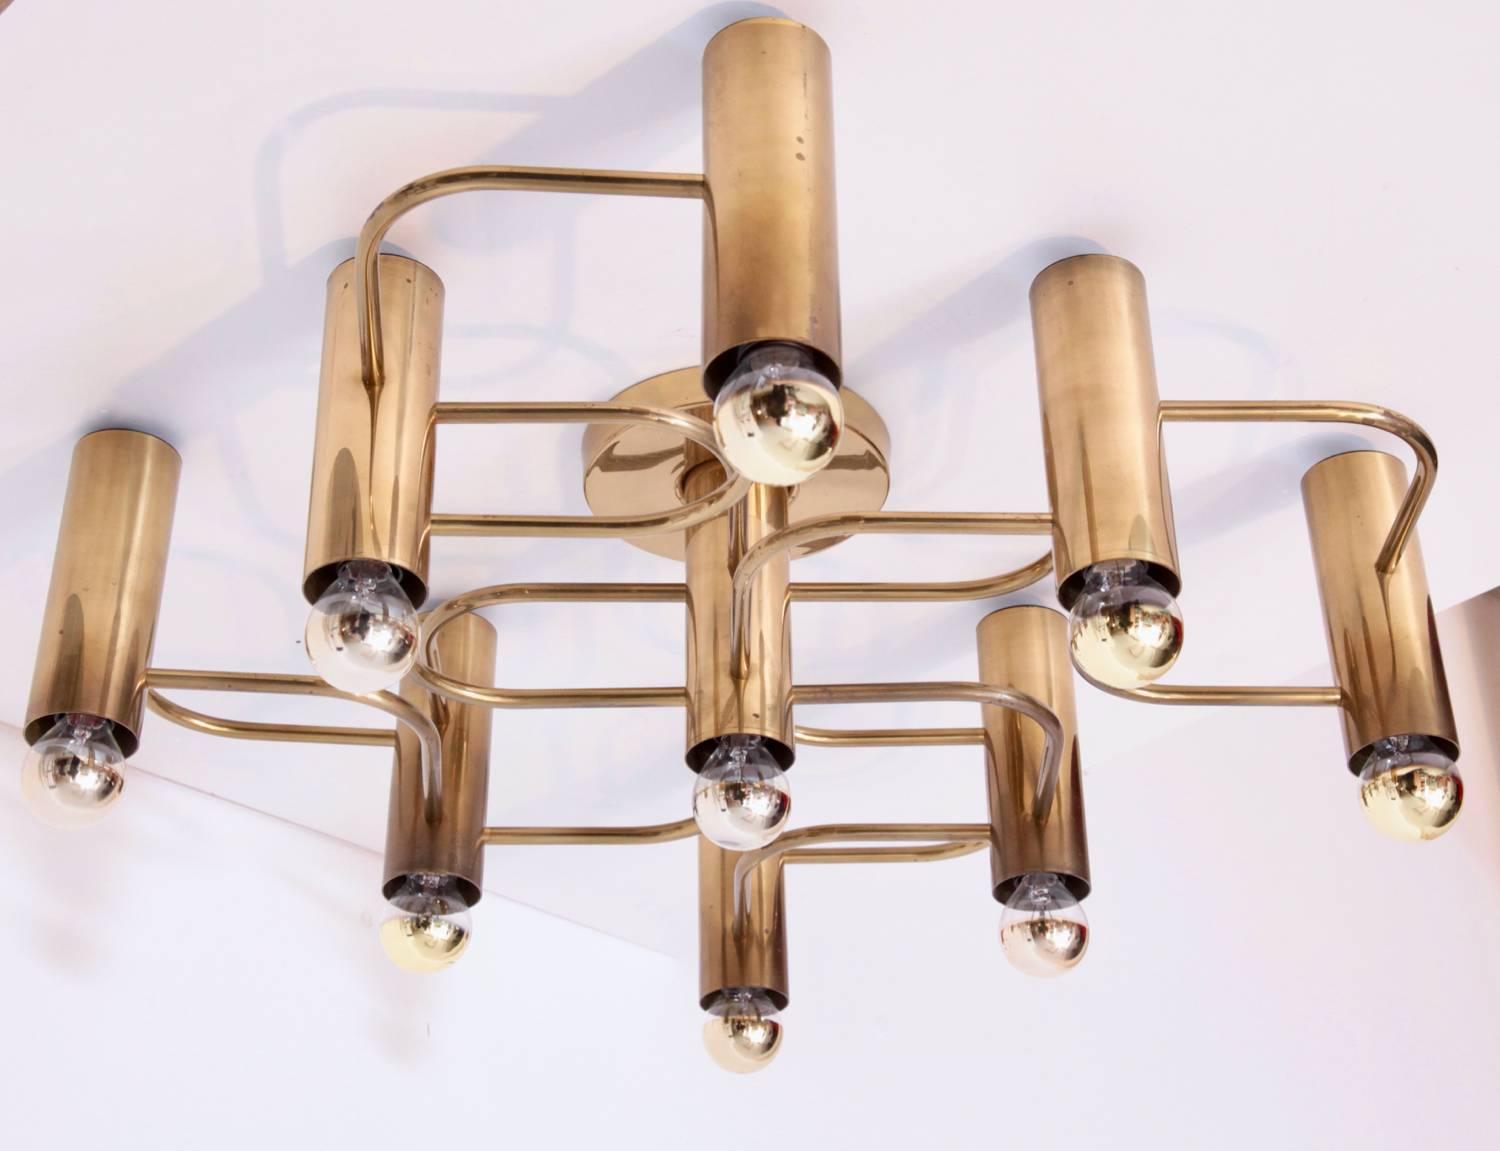 Stunning nine-light flush mount, wall or ceiling lamp. It can be used as wall or ceiling lamp and is in very good condition. Nine E14 bulbs.
To be on the the safe side, the lamp should be checked locally by a specialist concerning local